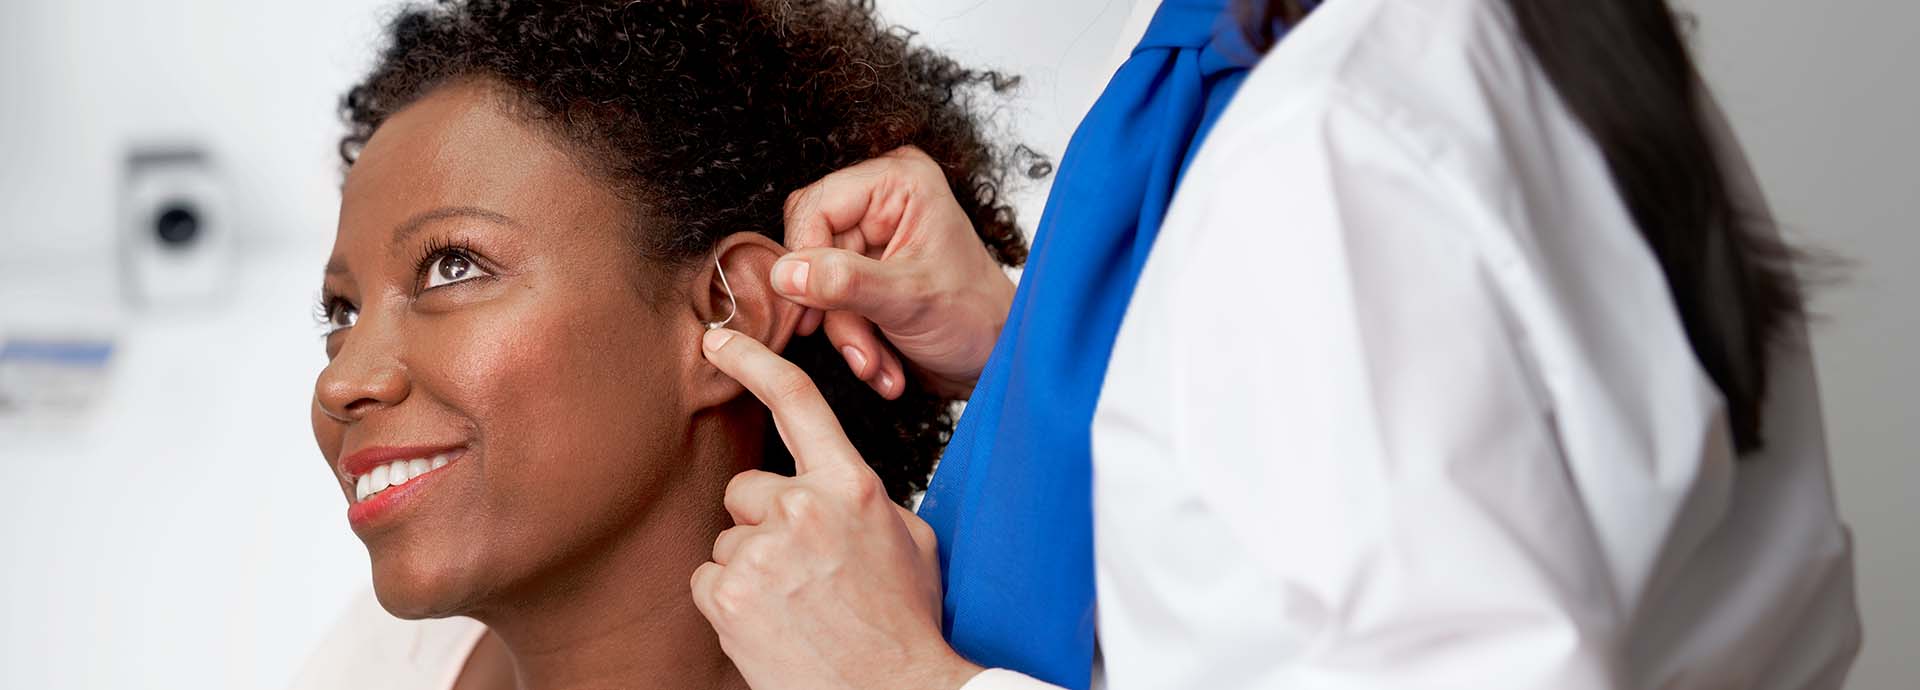 Image shows woman having a hearing aid placed behind her ear